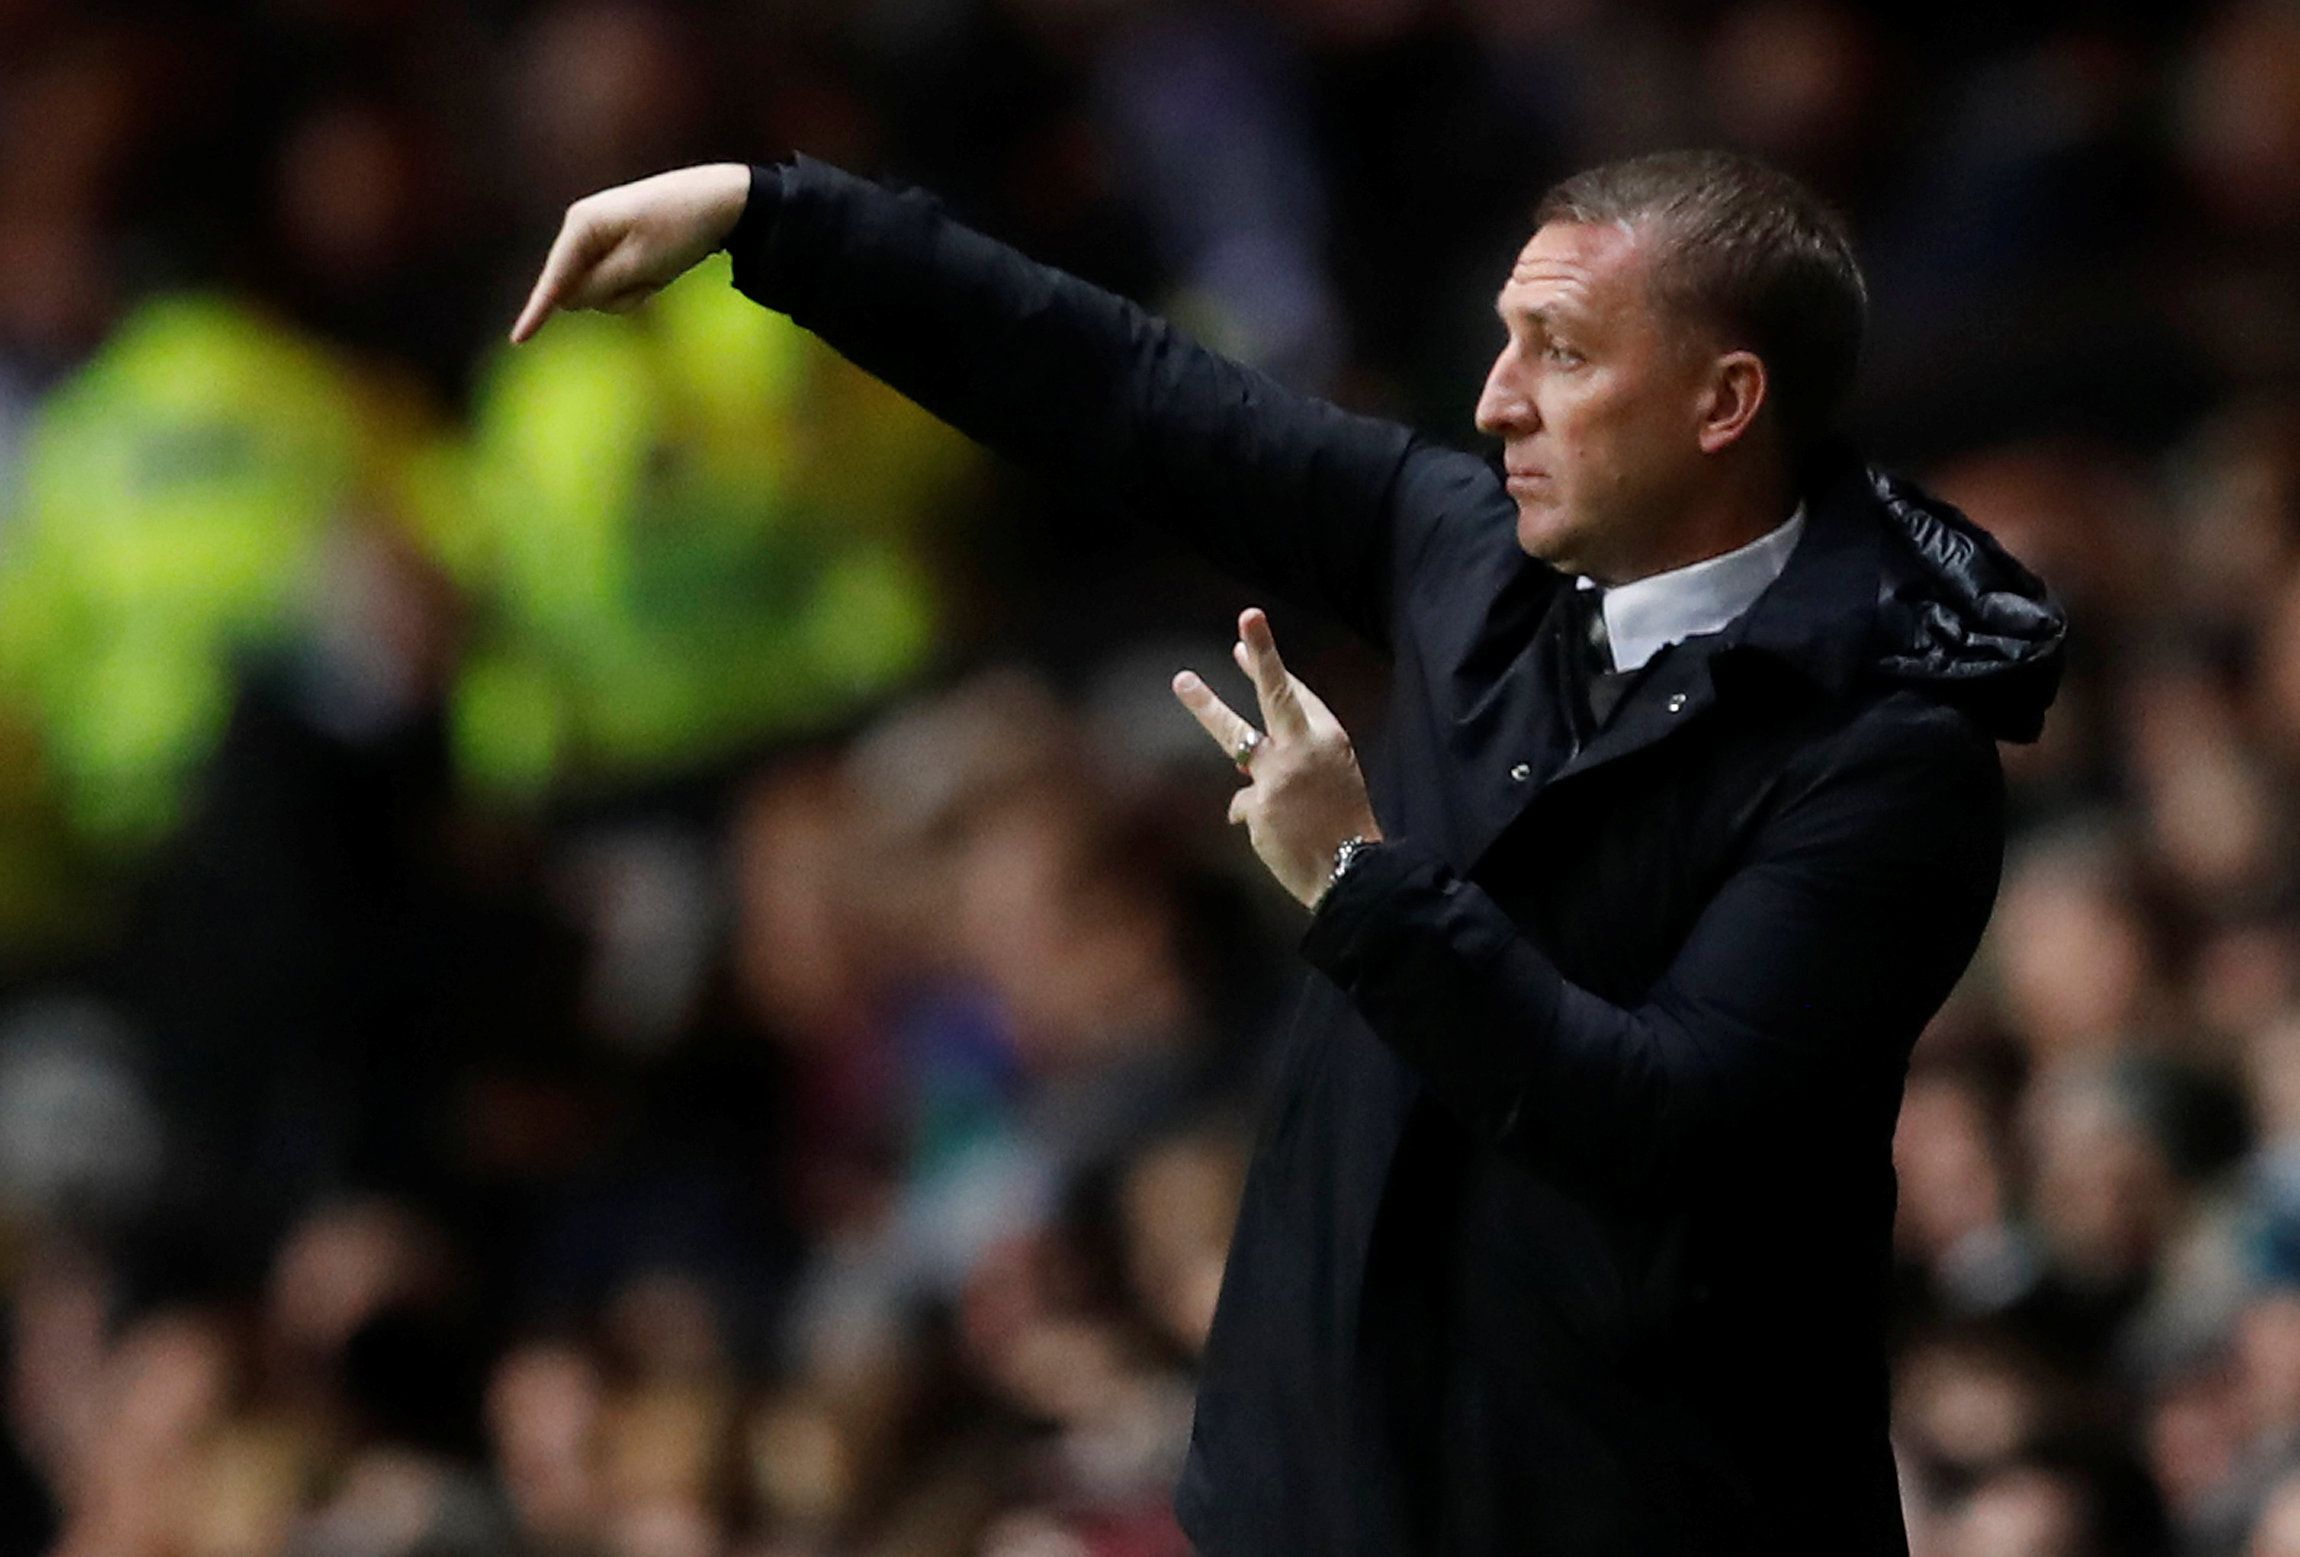 Soccer Football - Champions League - Celtic vs Anderlecht - Celtic Park, Glasgow, Britain - December 5, 2017  Celtic manager Brendan Rodgers during the game    REUTERS/Russell Cheyne